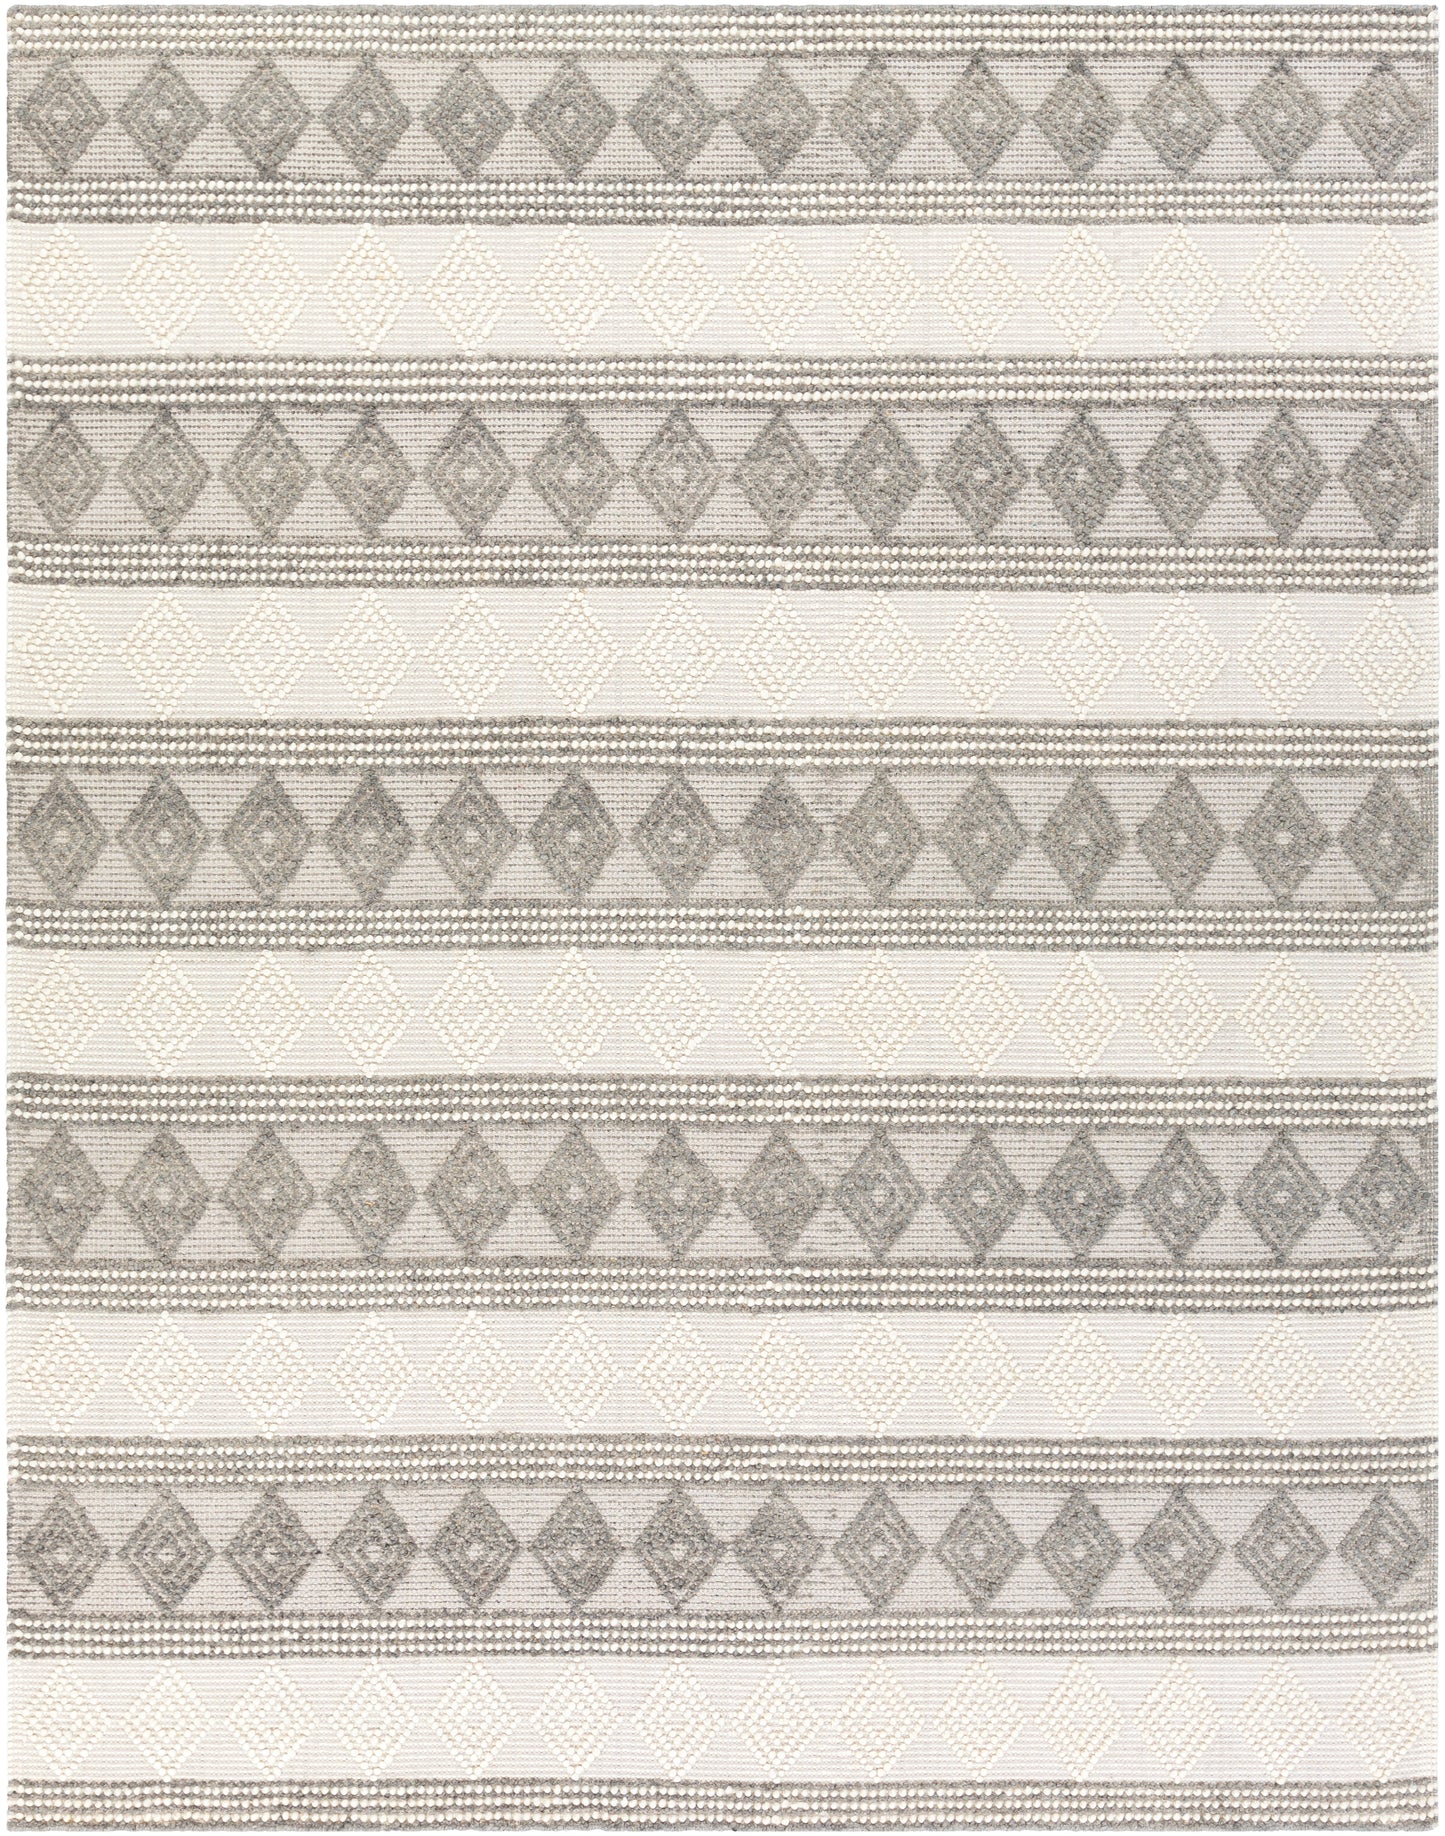 Hygge 23225 Hand Woven Wool Indoor Area Rug by Surya Rugs